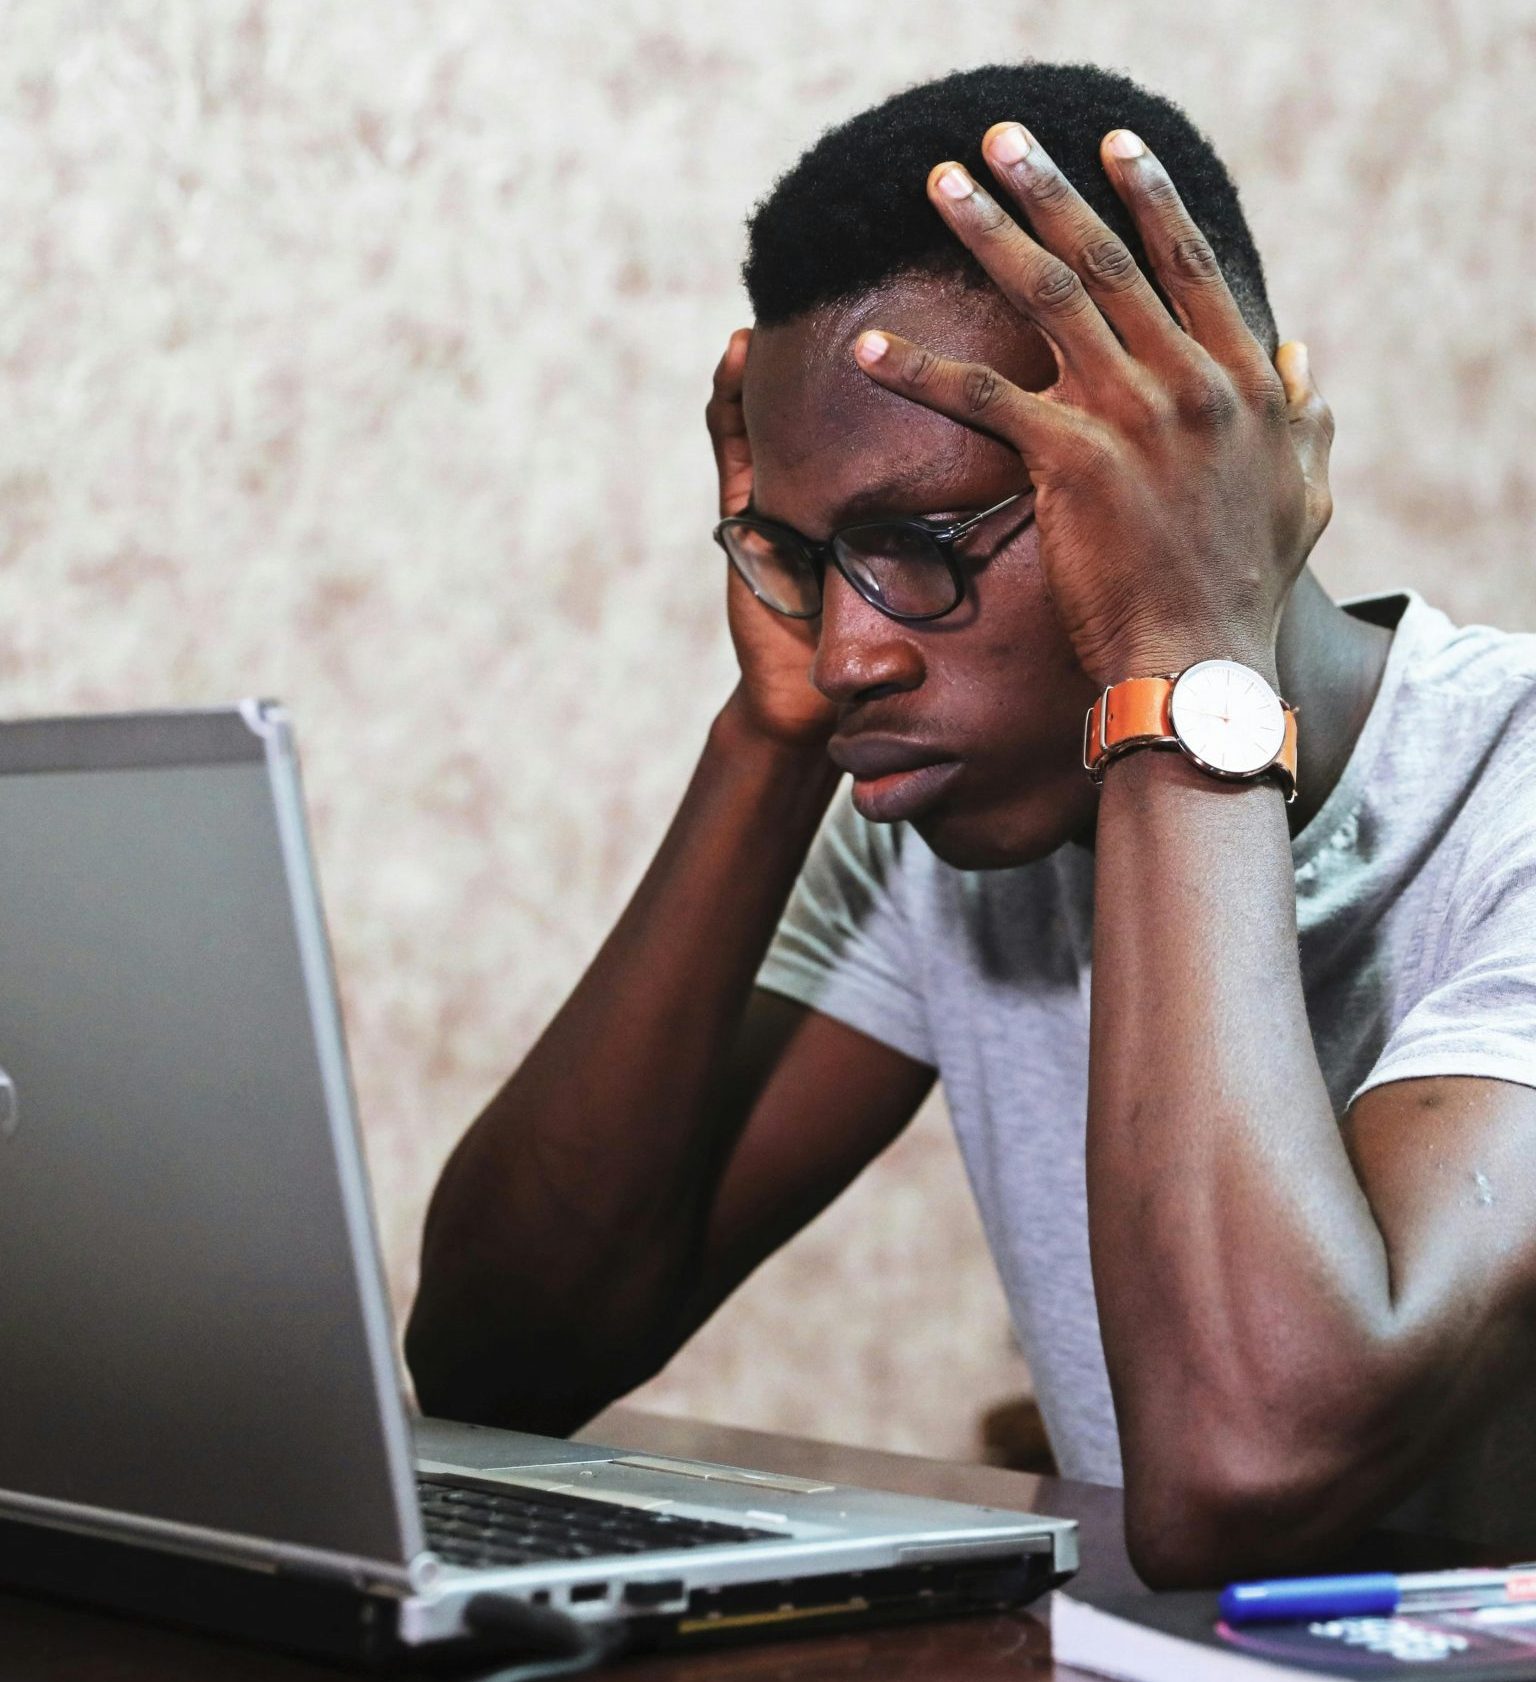 Image portrays a stressed man with hands on head, gazing at a screen, illustrating the mental health strain of prolonged screen use, potentially leading to increased anxiety and cognitive overload